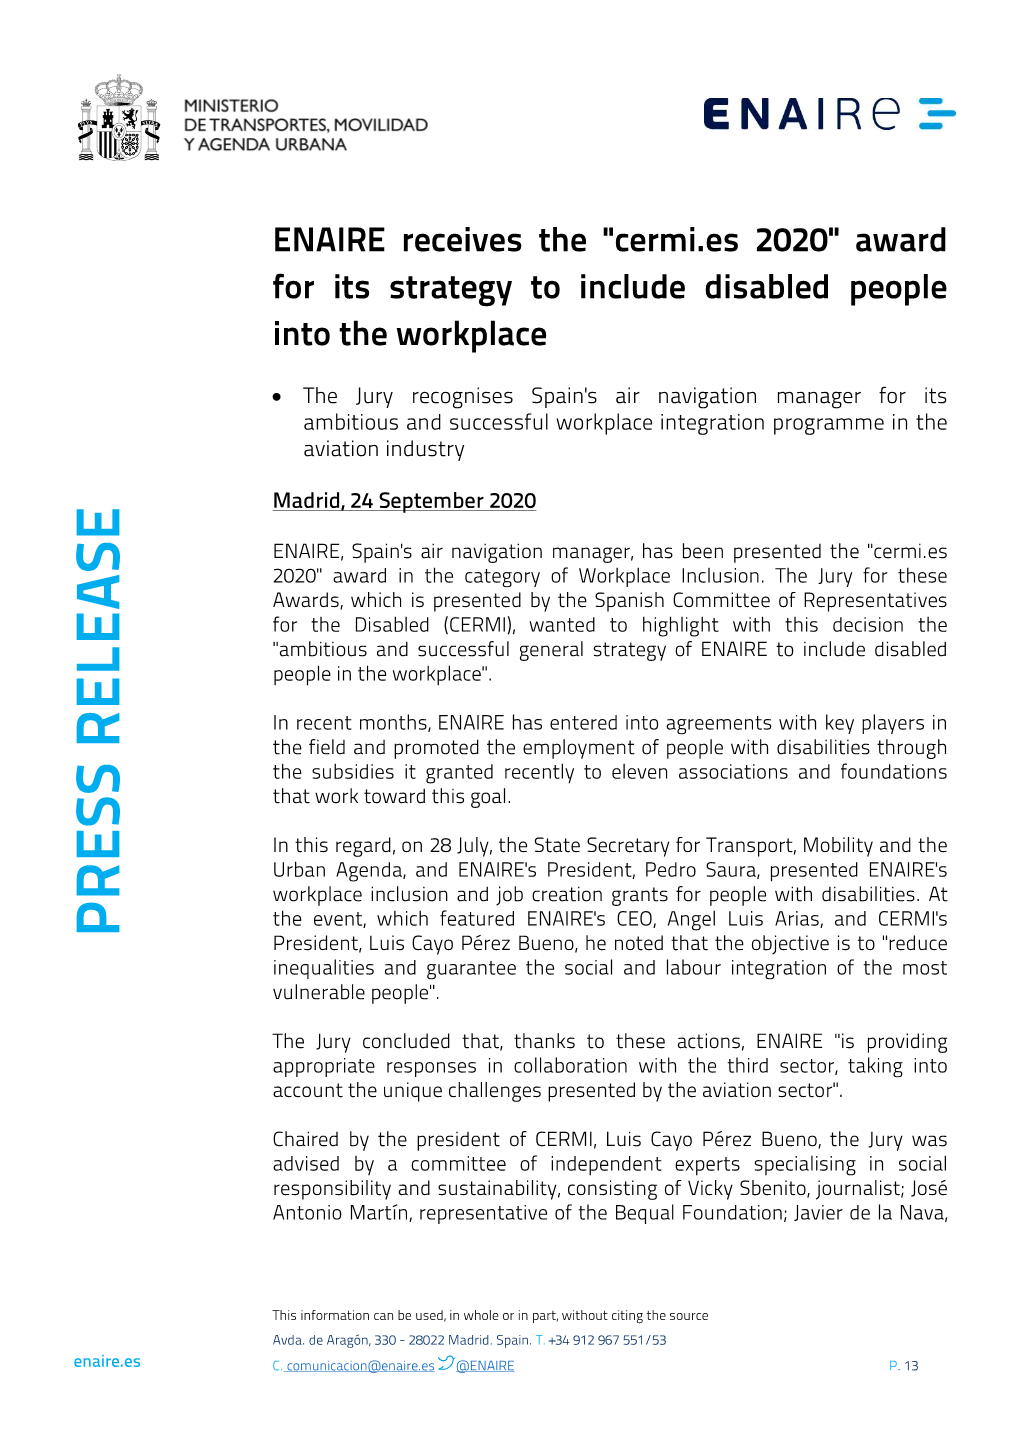 ENAIRE Receives the "Cermi.Es 2020" Award for Its Strategy to Include Disabled People Into the Workplace